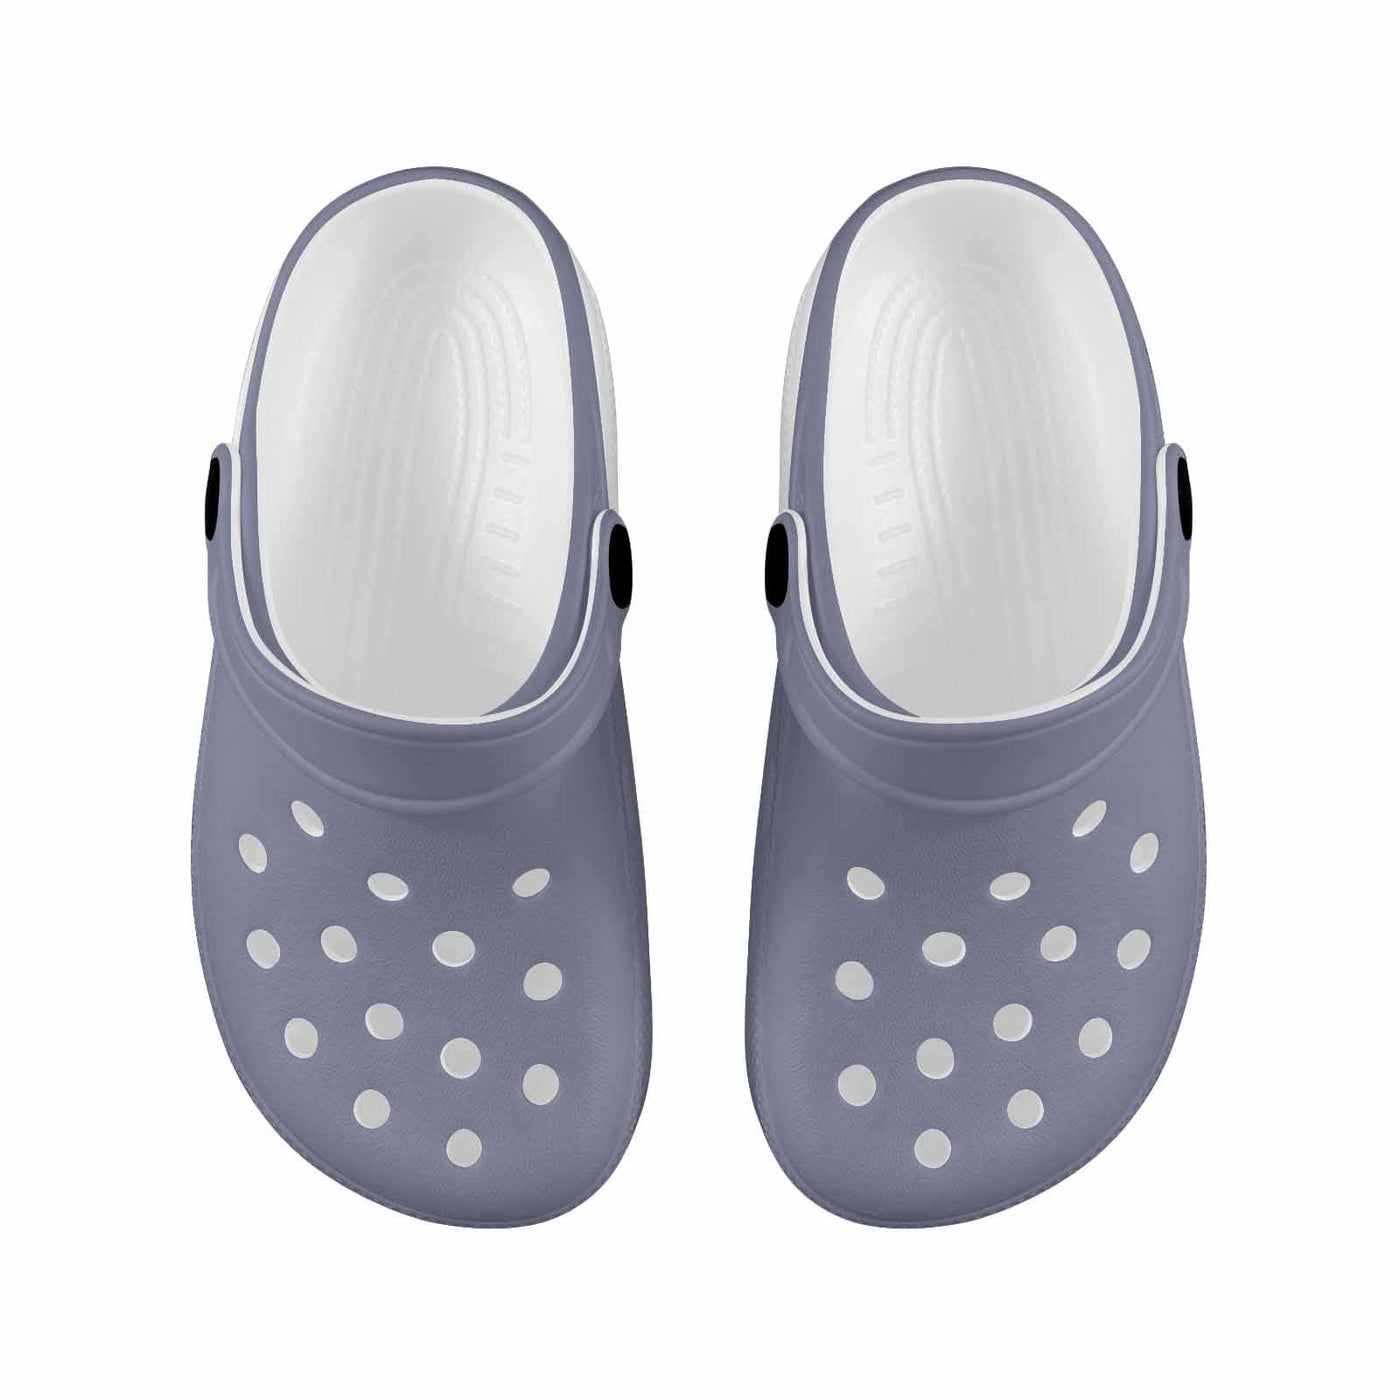 Cool Grey Clogs For Youth - Unisex | Clogs | Youth